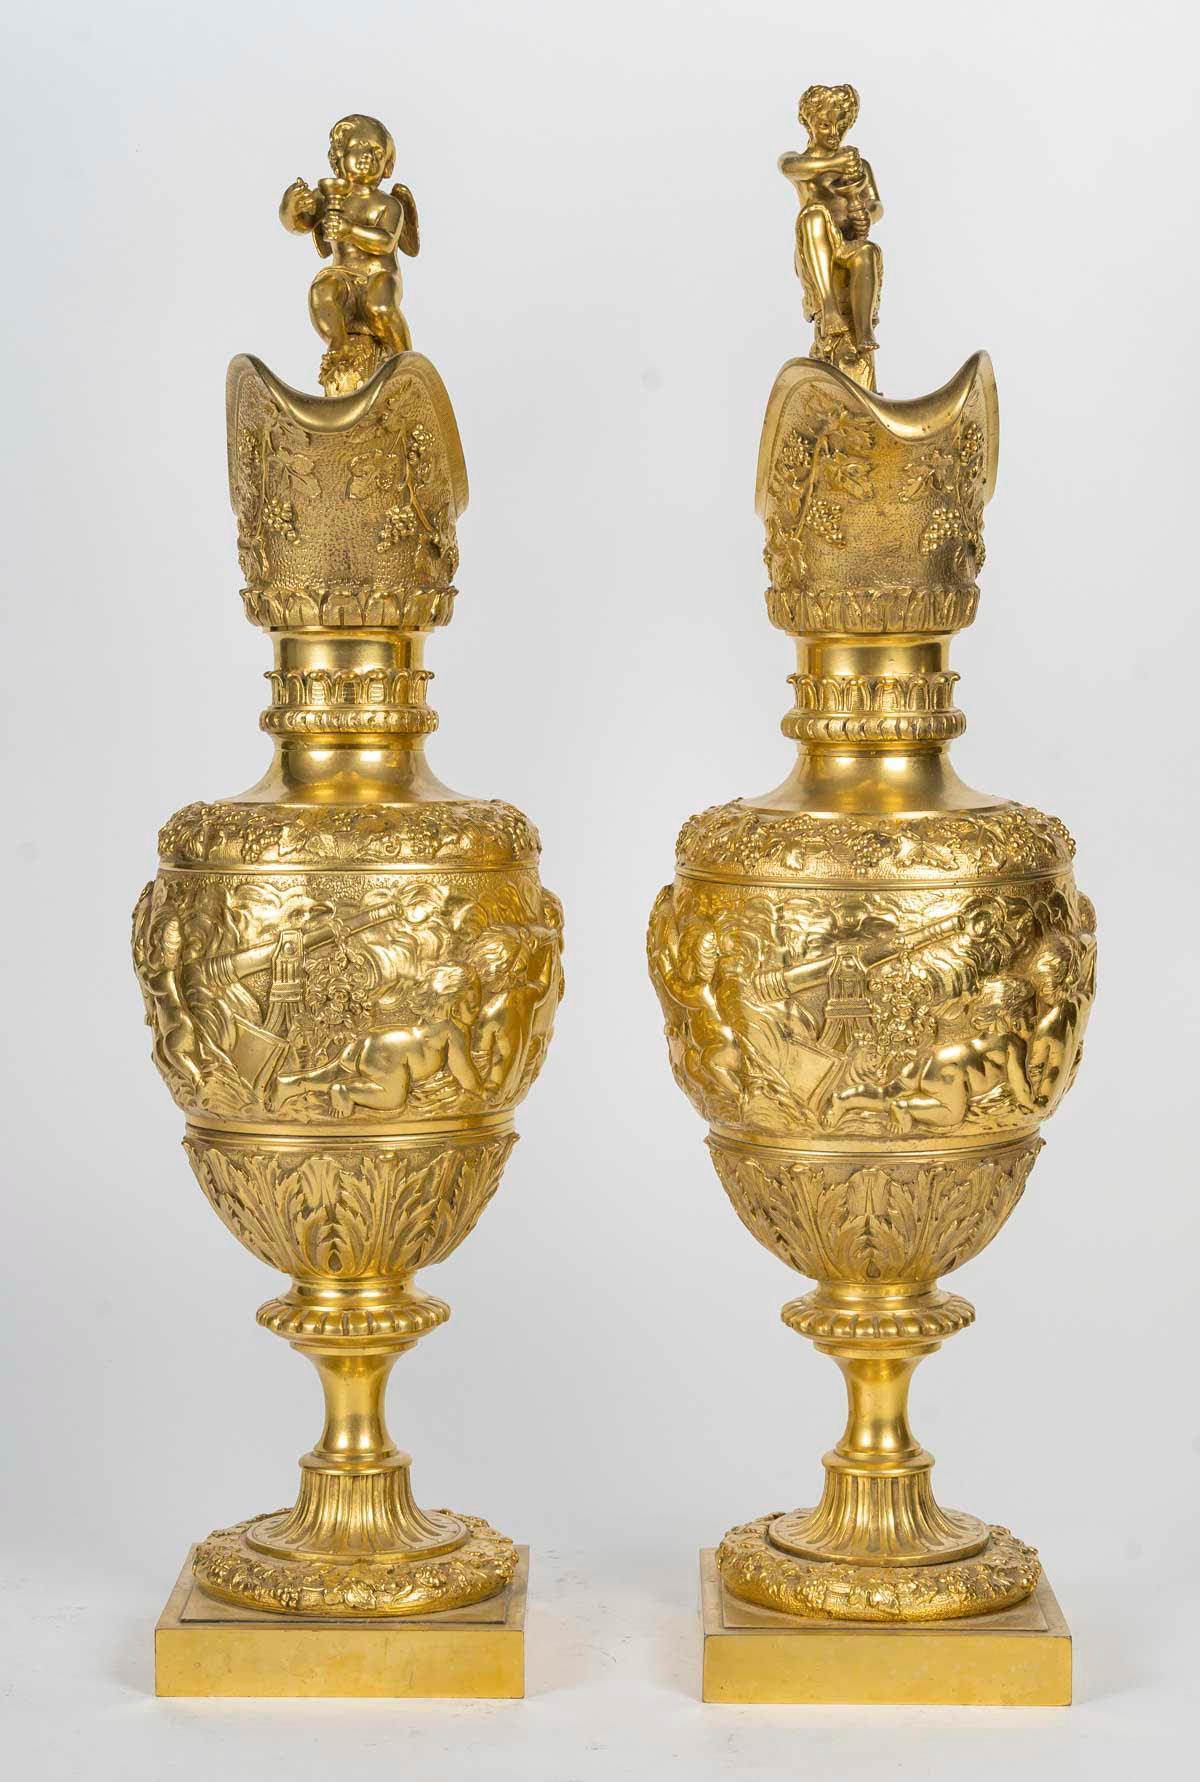 A Large Pair of Gilt Bronze Ewers in the Louis XIV Style, 19th Century. For Sale 4